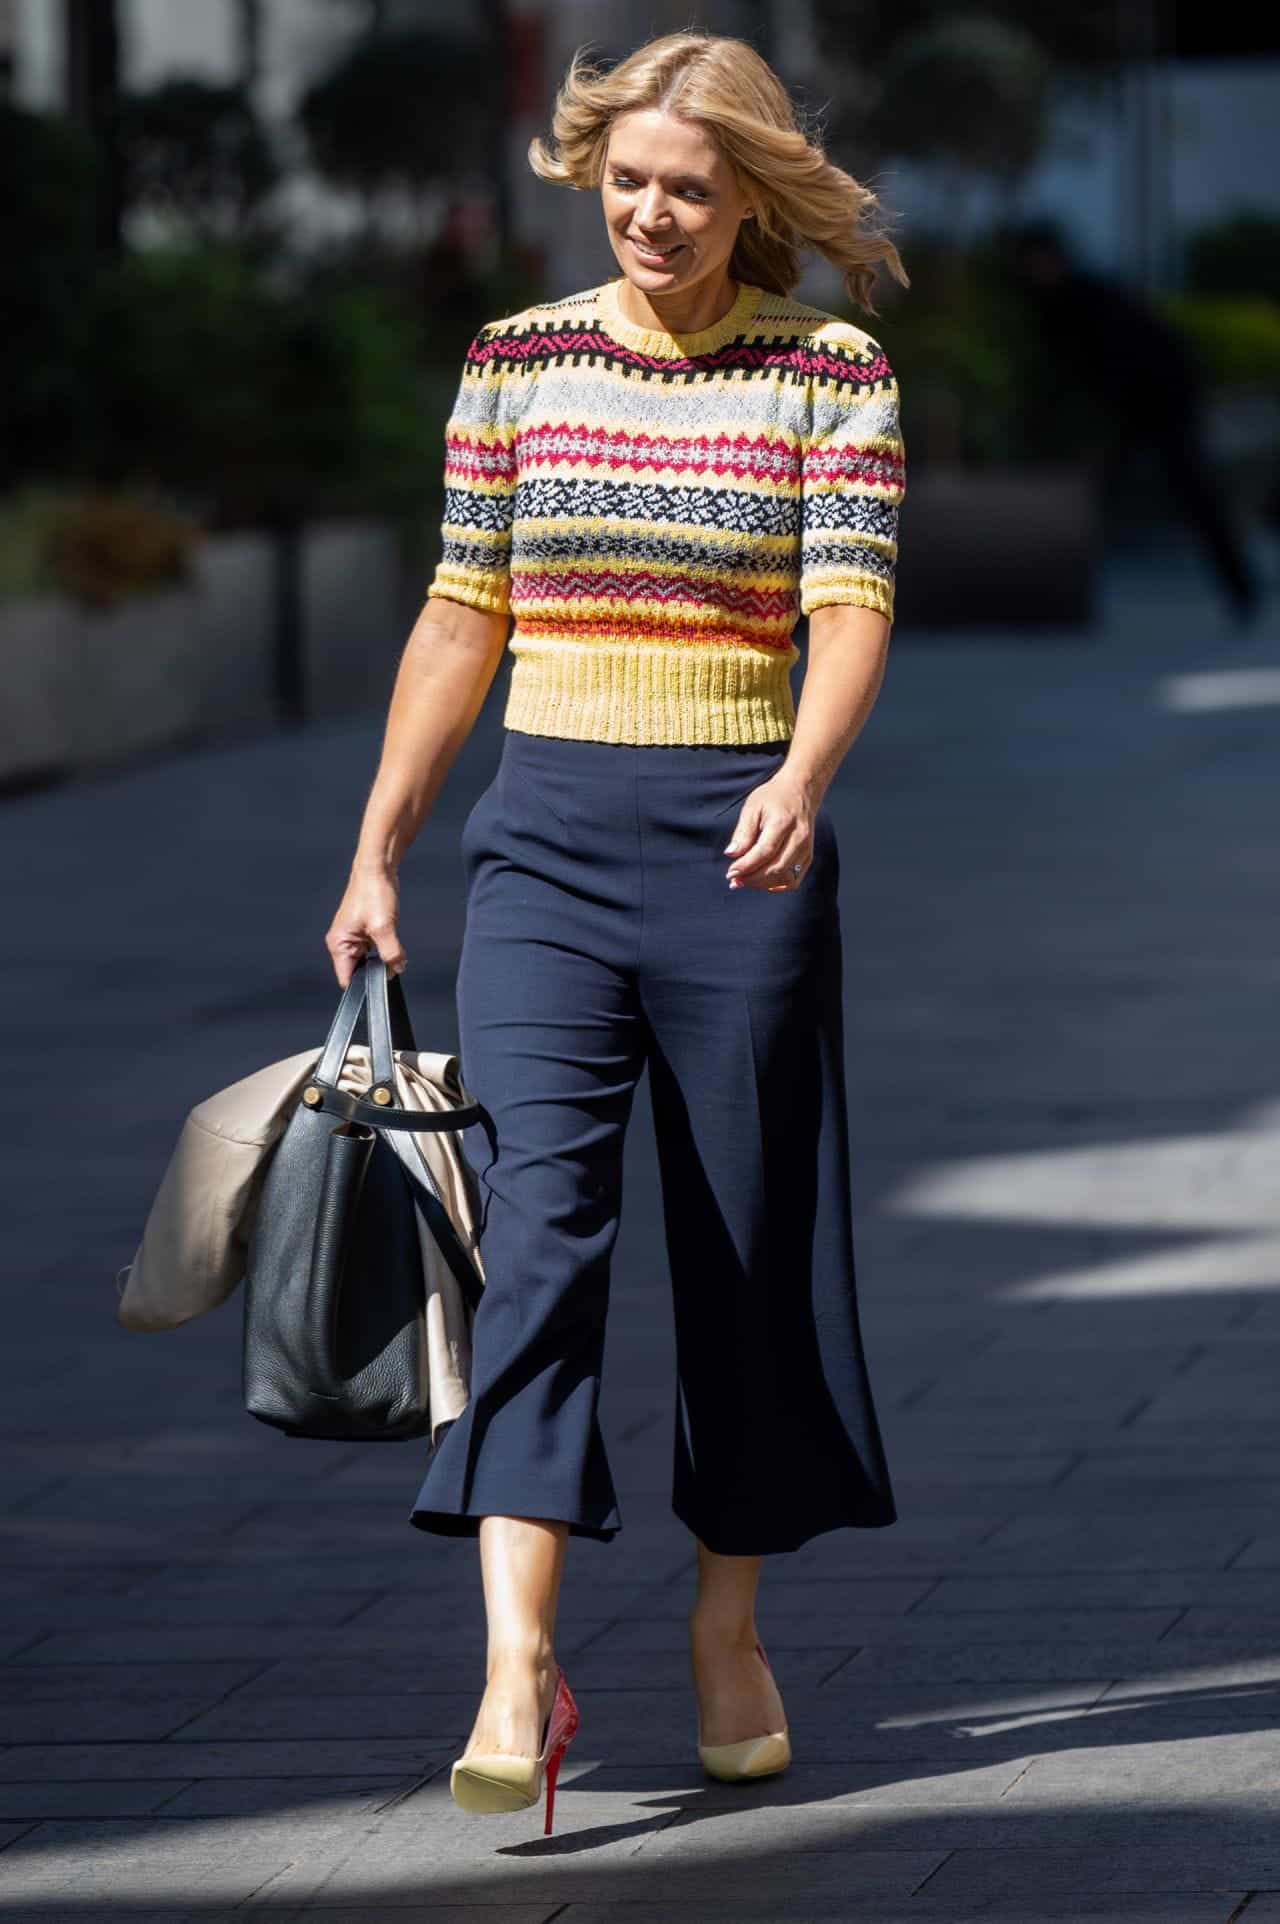 charlotte hawkins in colorful sweater enjoys a casual stroll 4